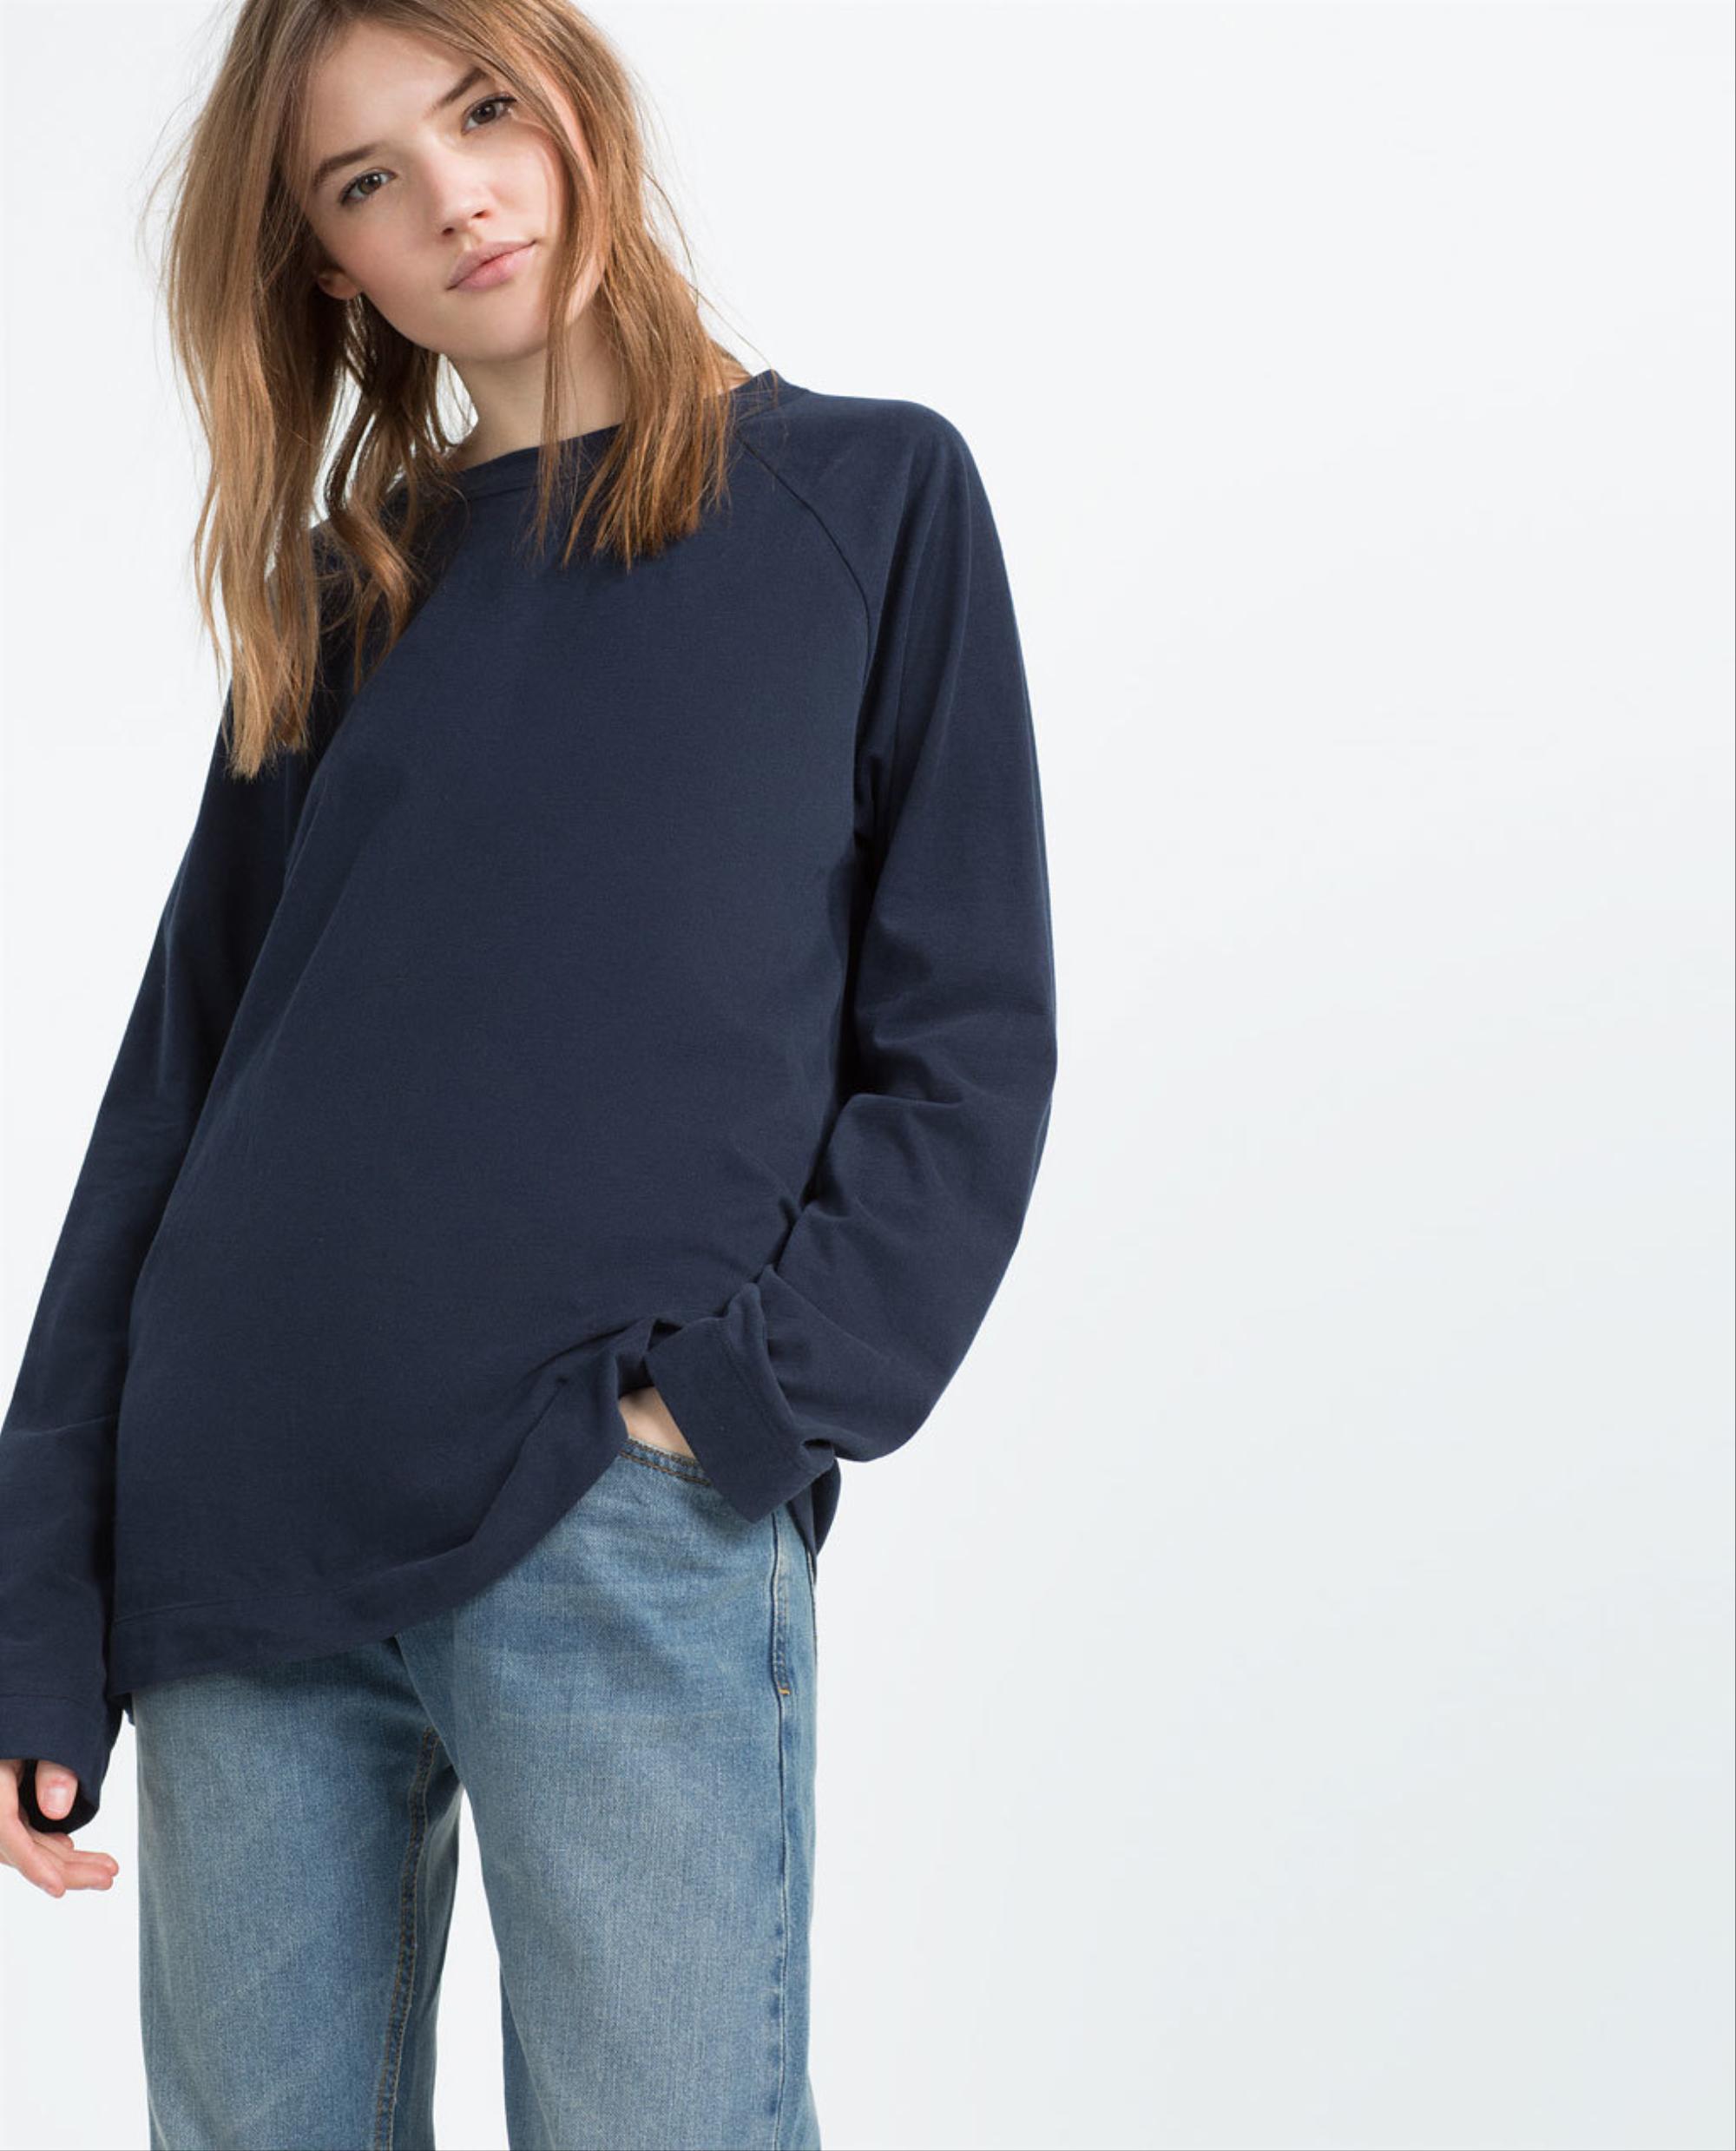 zara quietly joins the gender-neutral movement | read | i-D